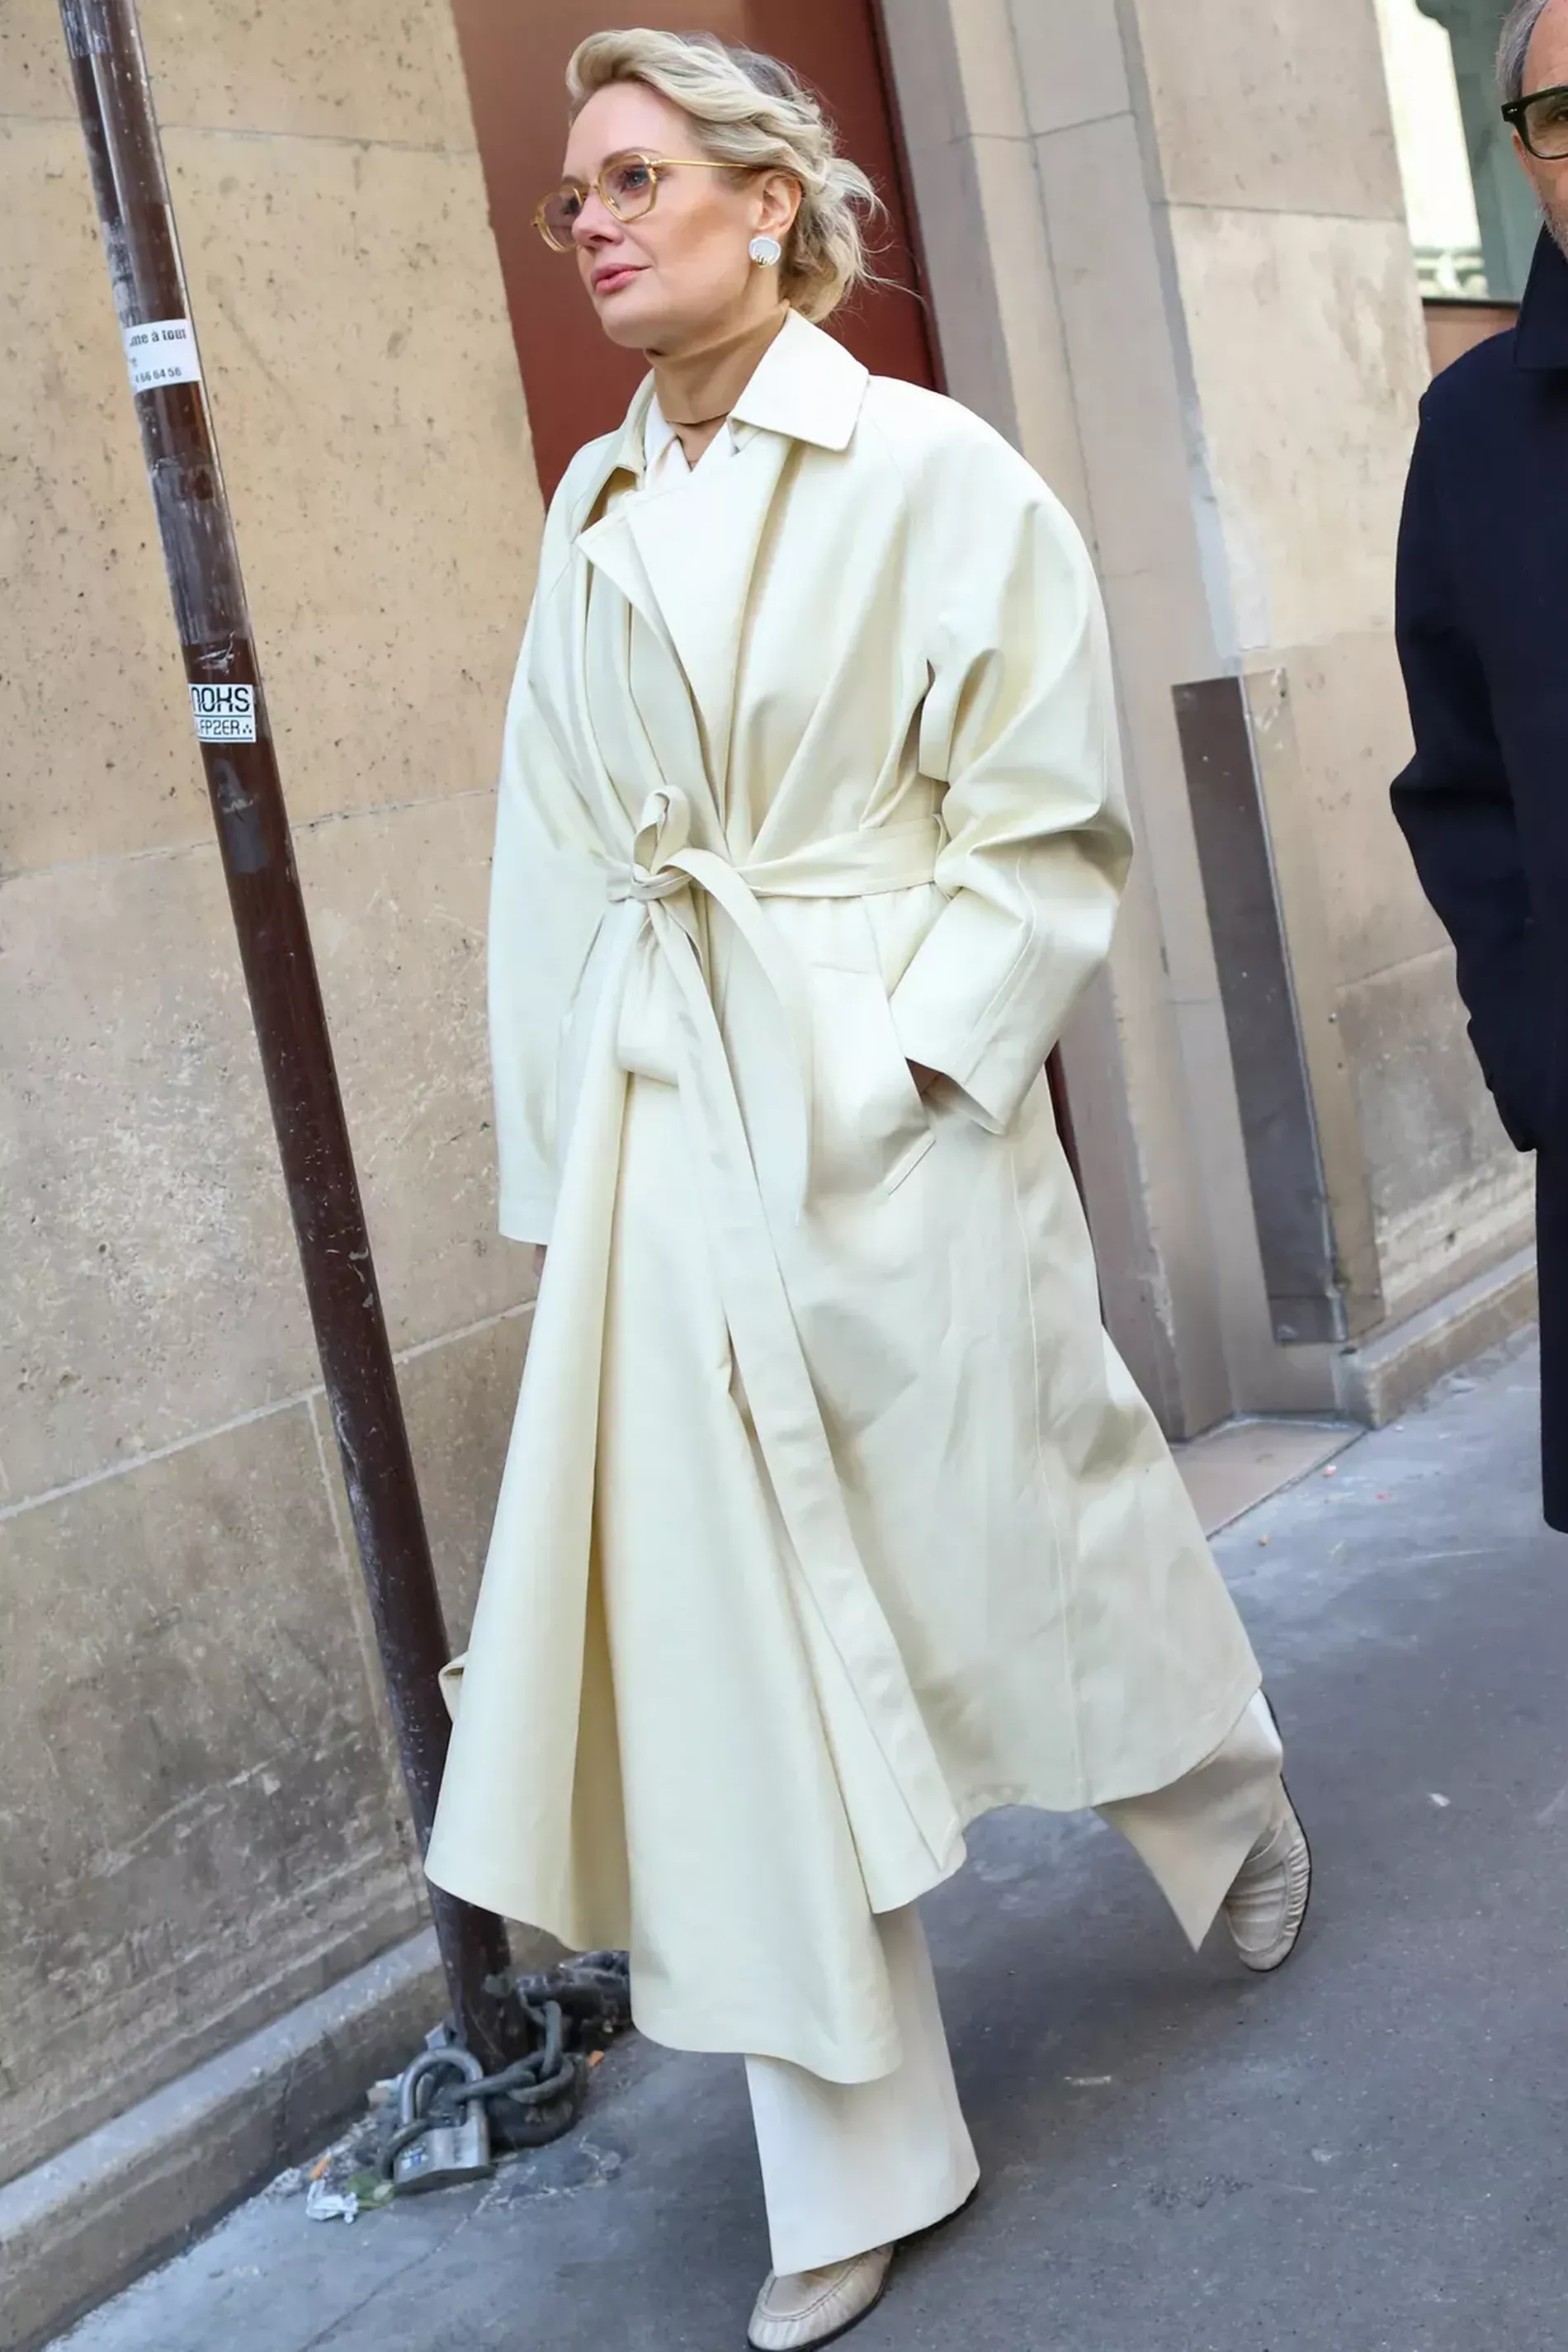 Paris Fashion Week guest wears cream coat over brown turtle neck and suit pants 